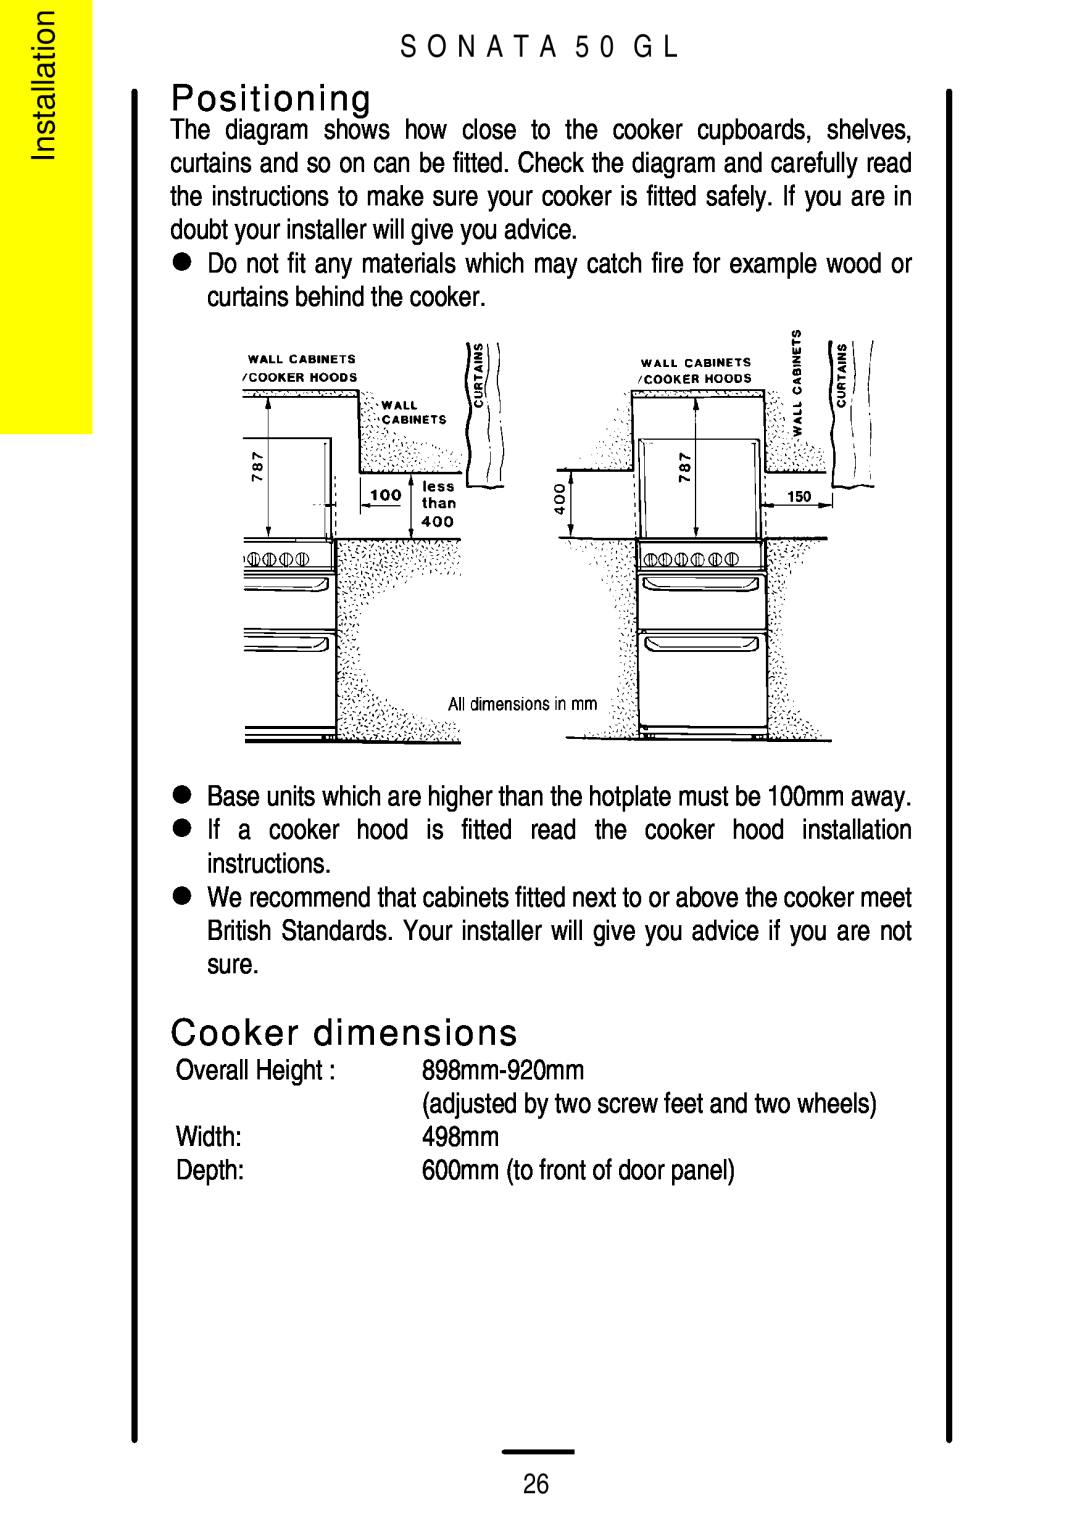 Electrolux installation instructions Positioning, Cooker dimensions, Installation, S O N A T A 5 0 G L 